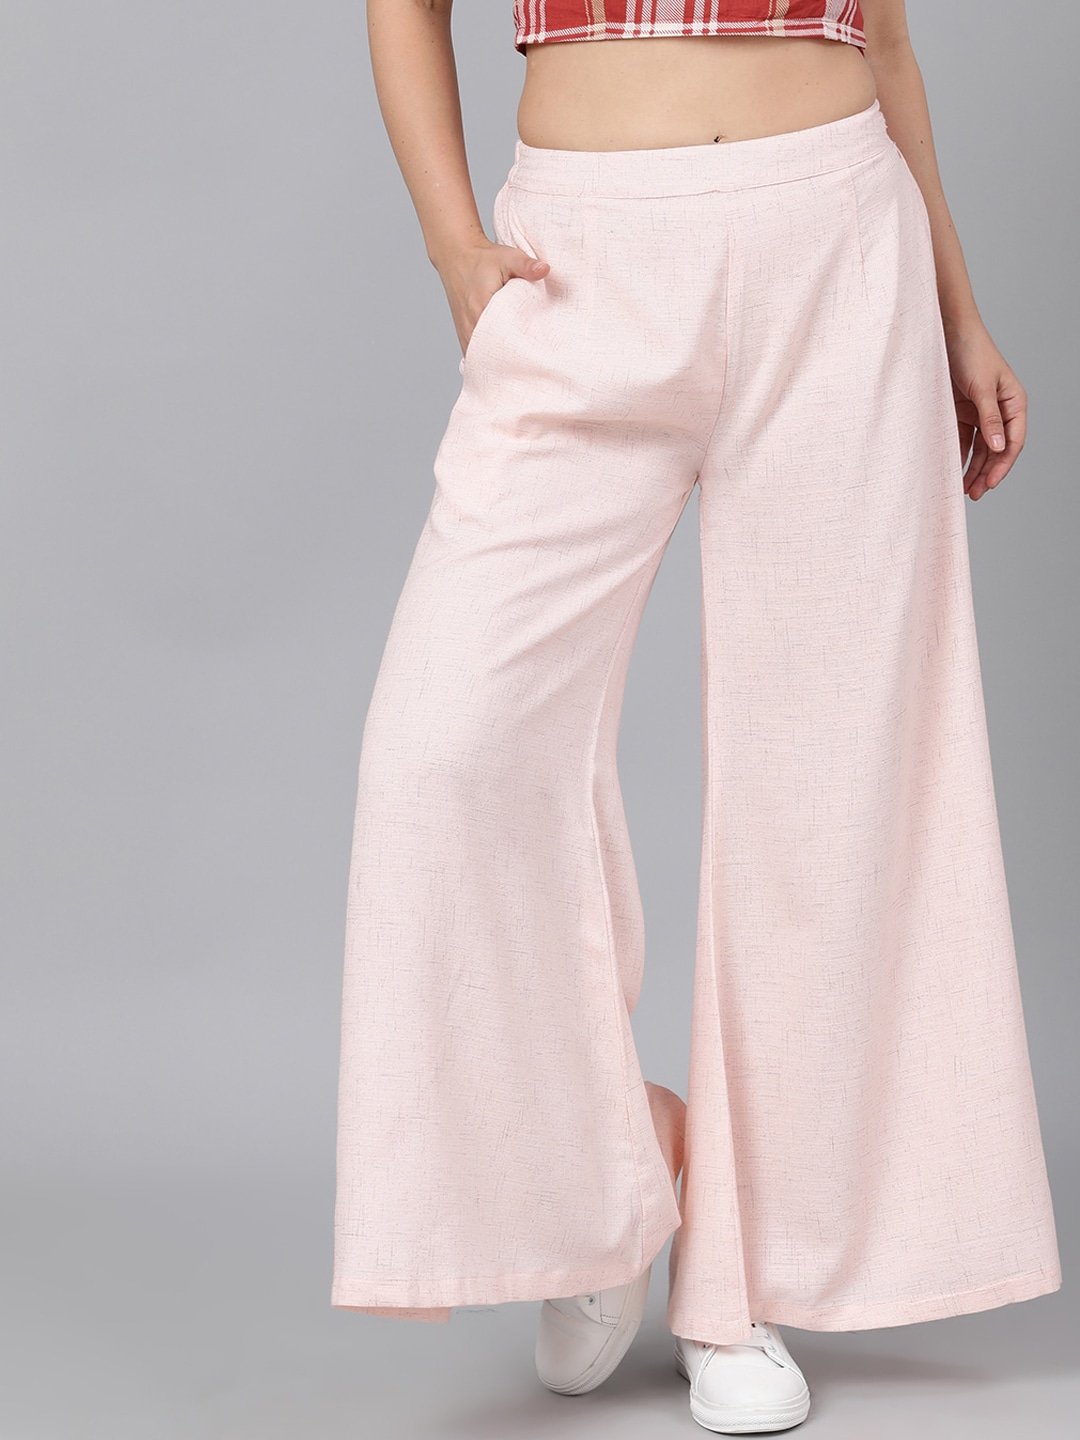 Women's  Pink Solid Flared Palazzos - AKS